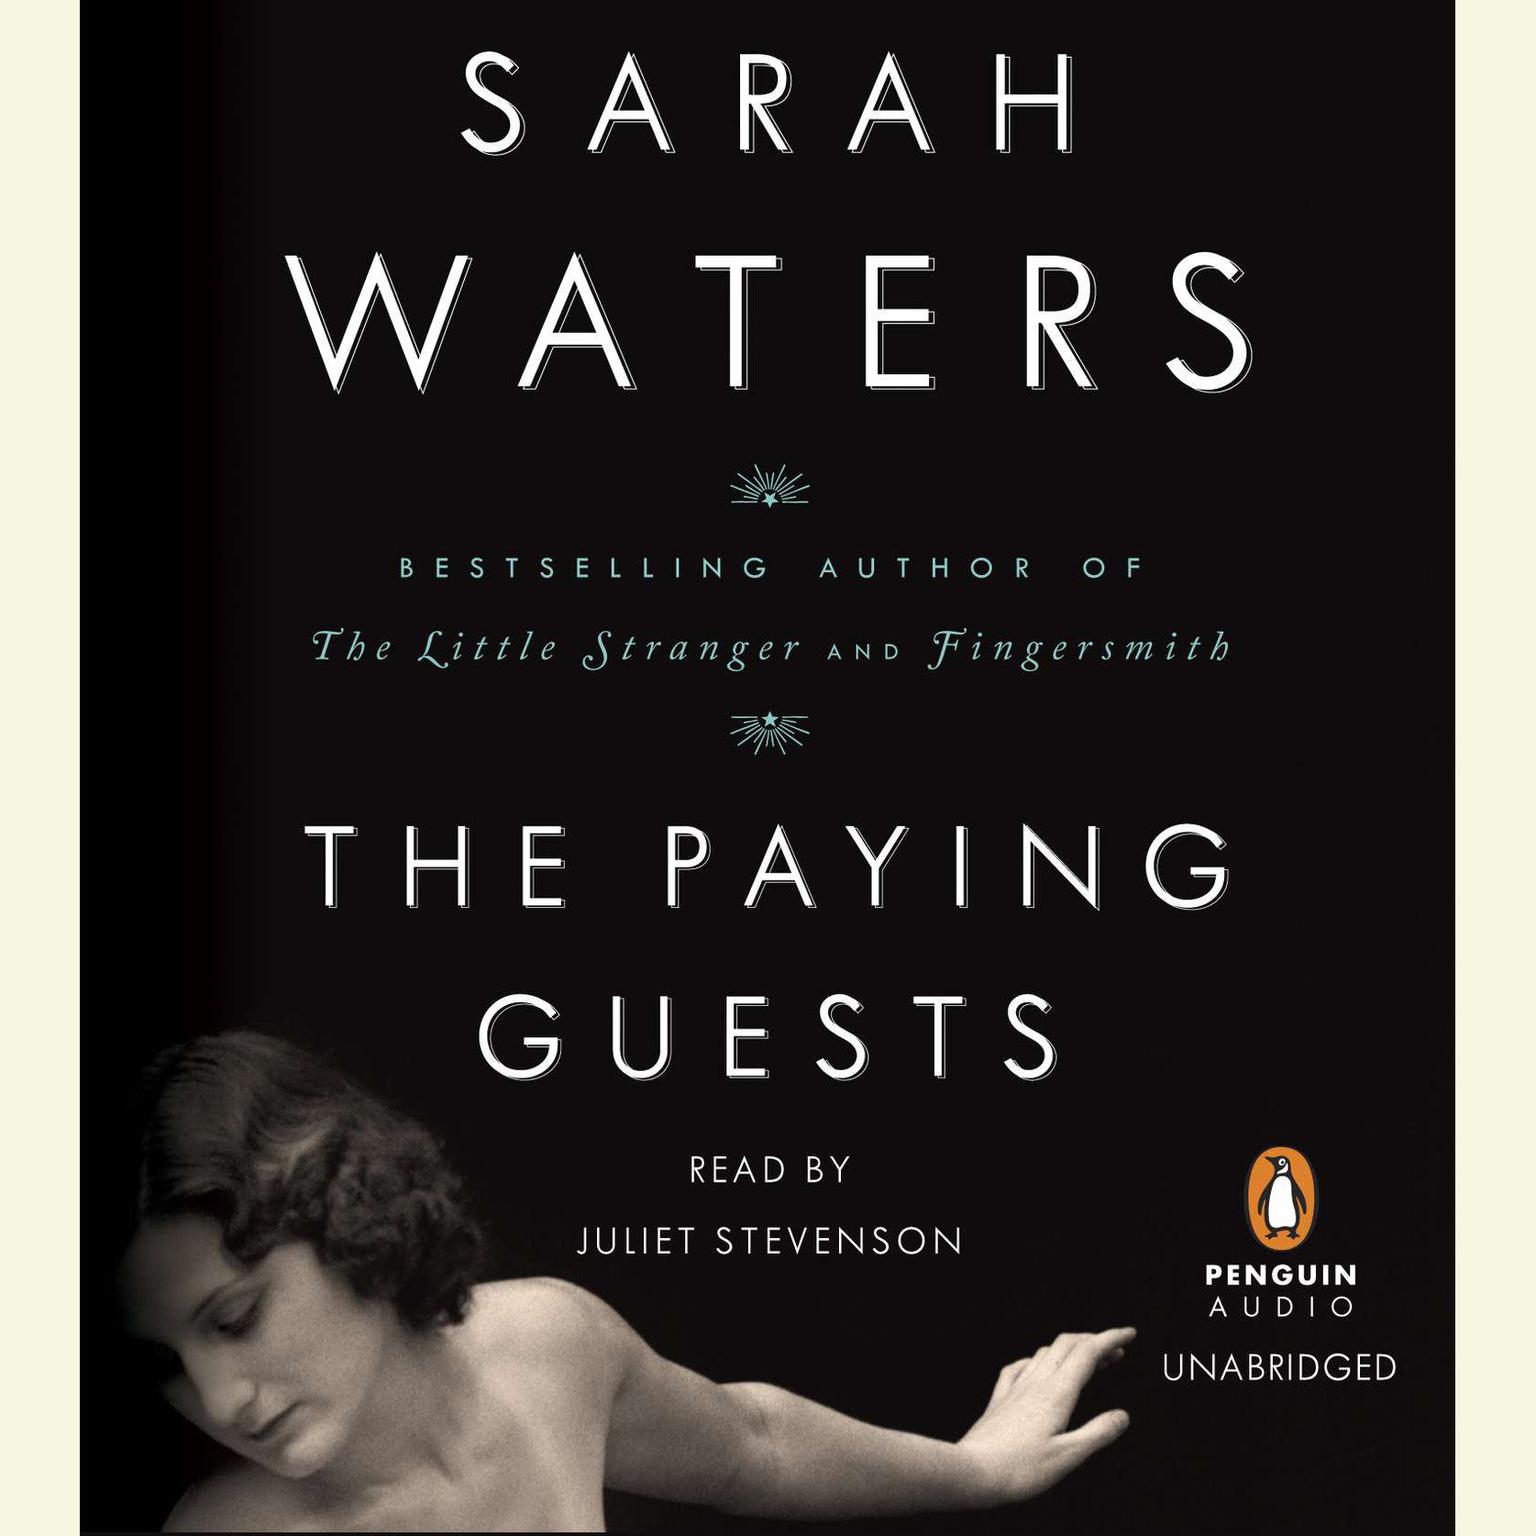 The Paying Guests Audiobook, by Sarah Waters